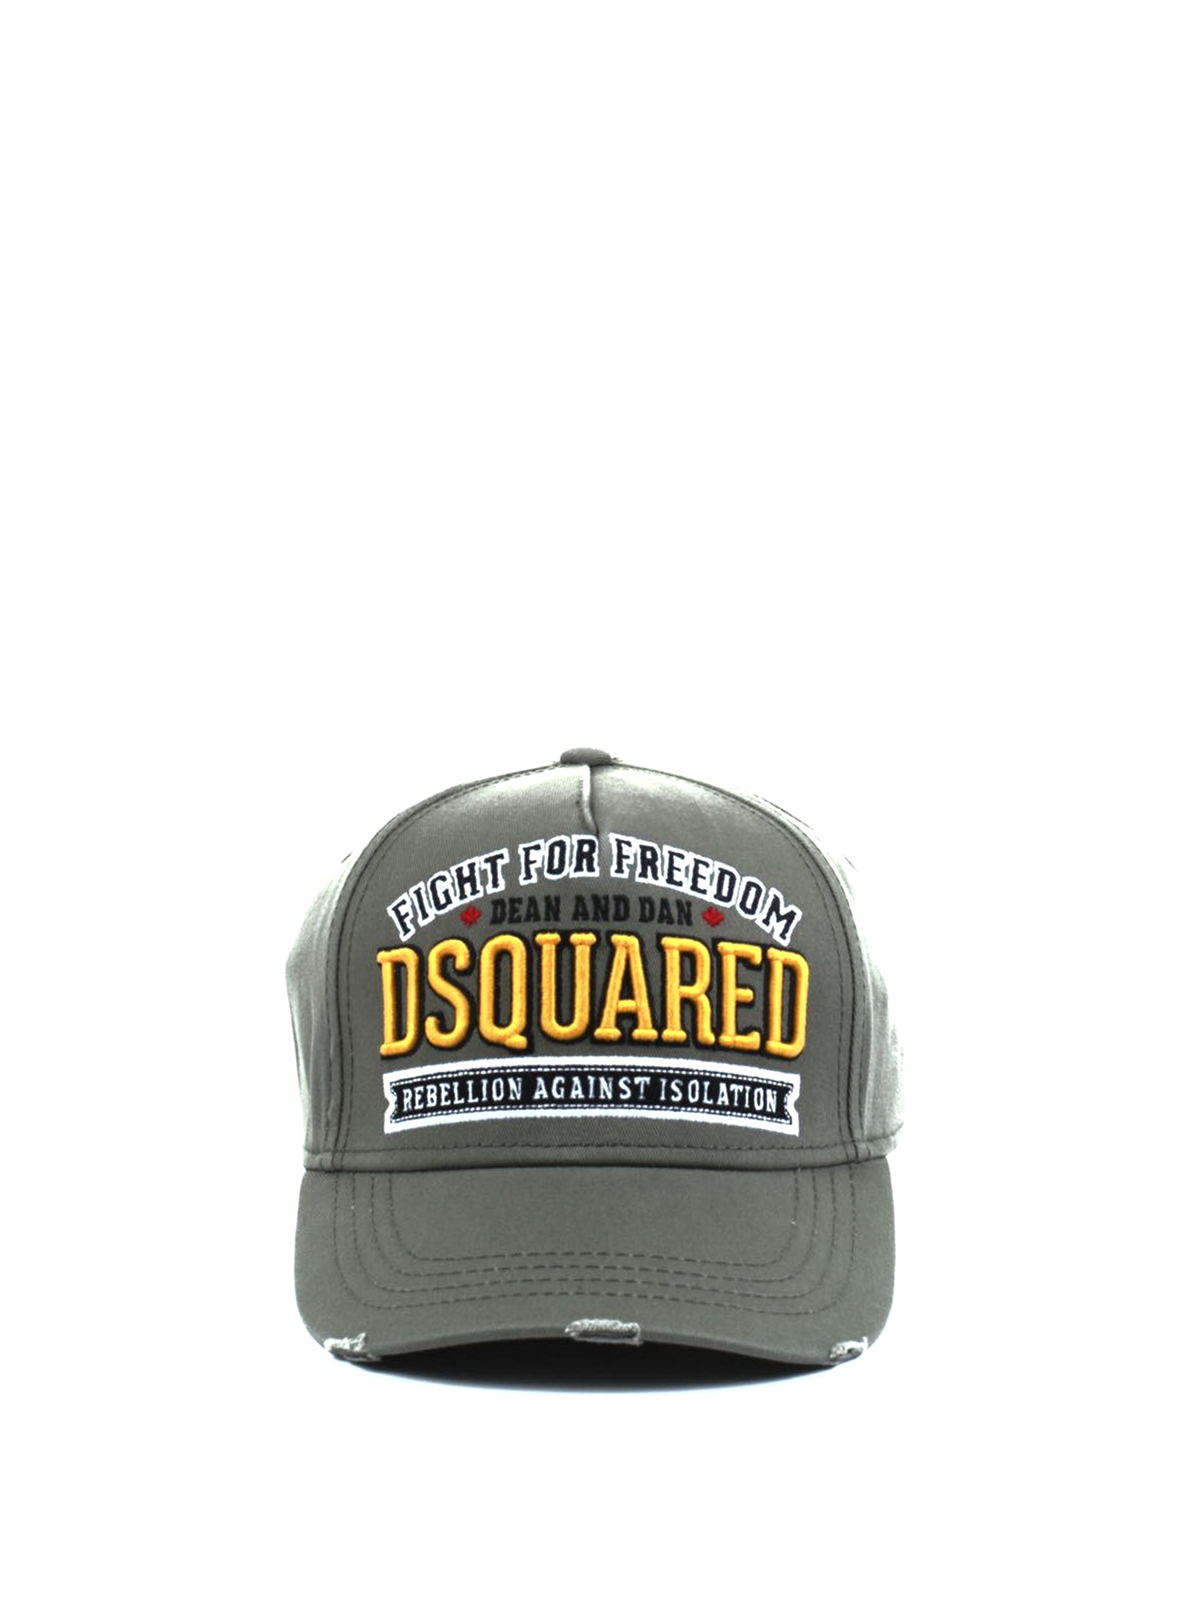 dsquared2 fight for freedom cap